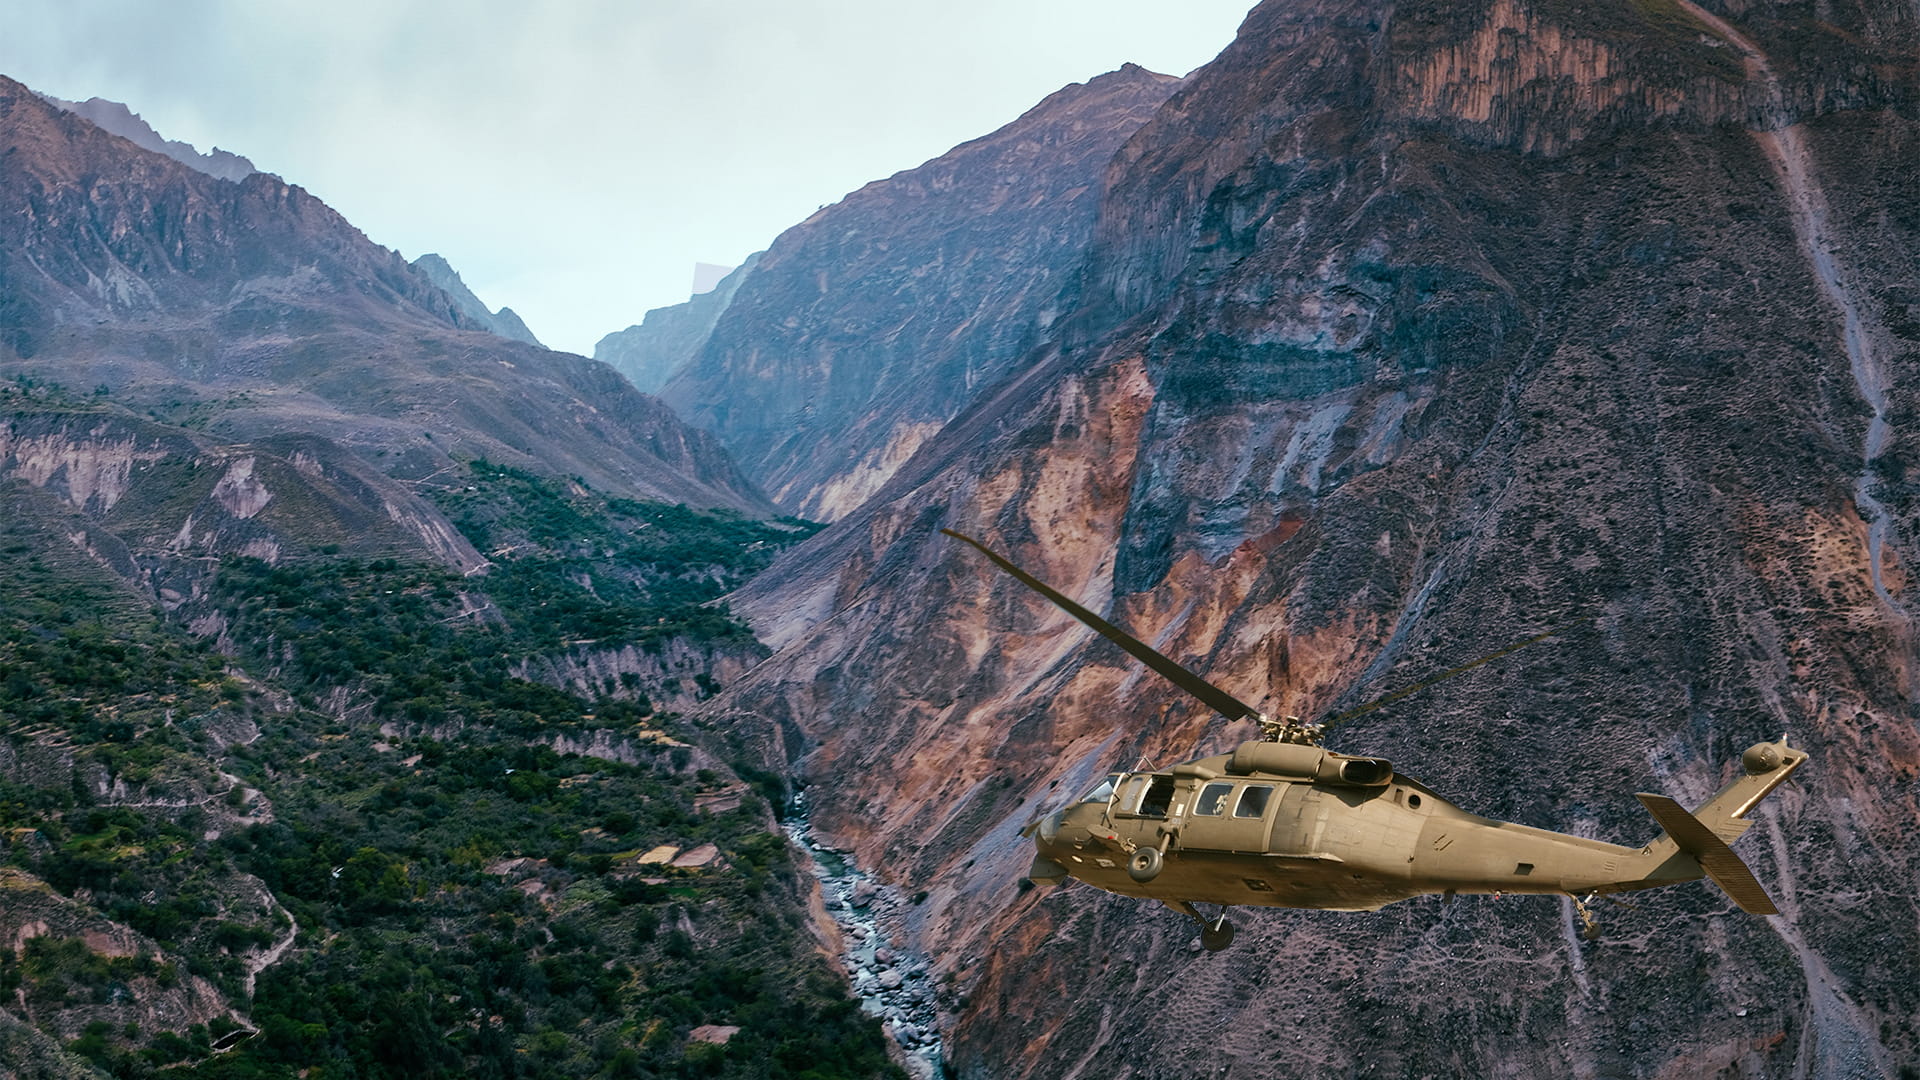 Helicopter flying through mountains and valleys